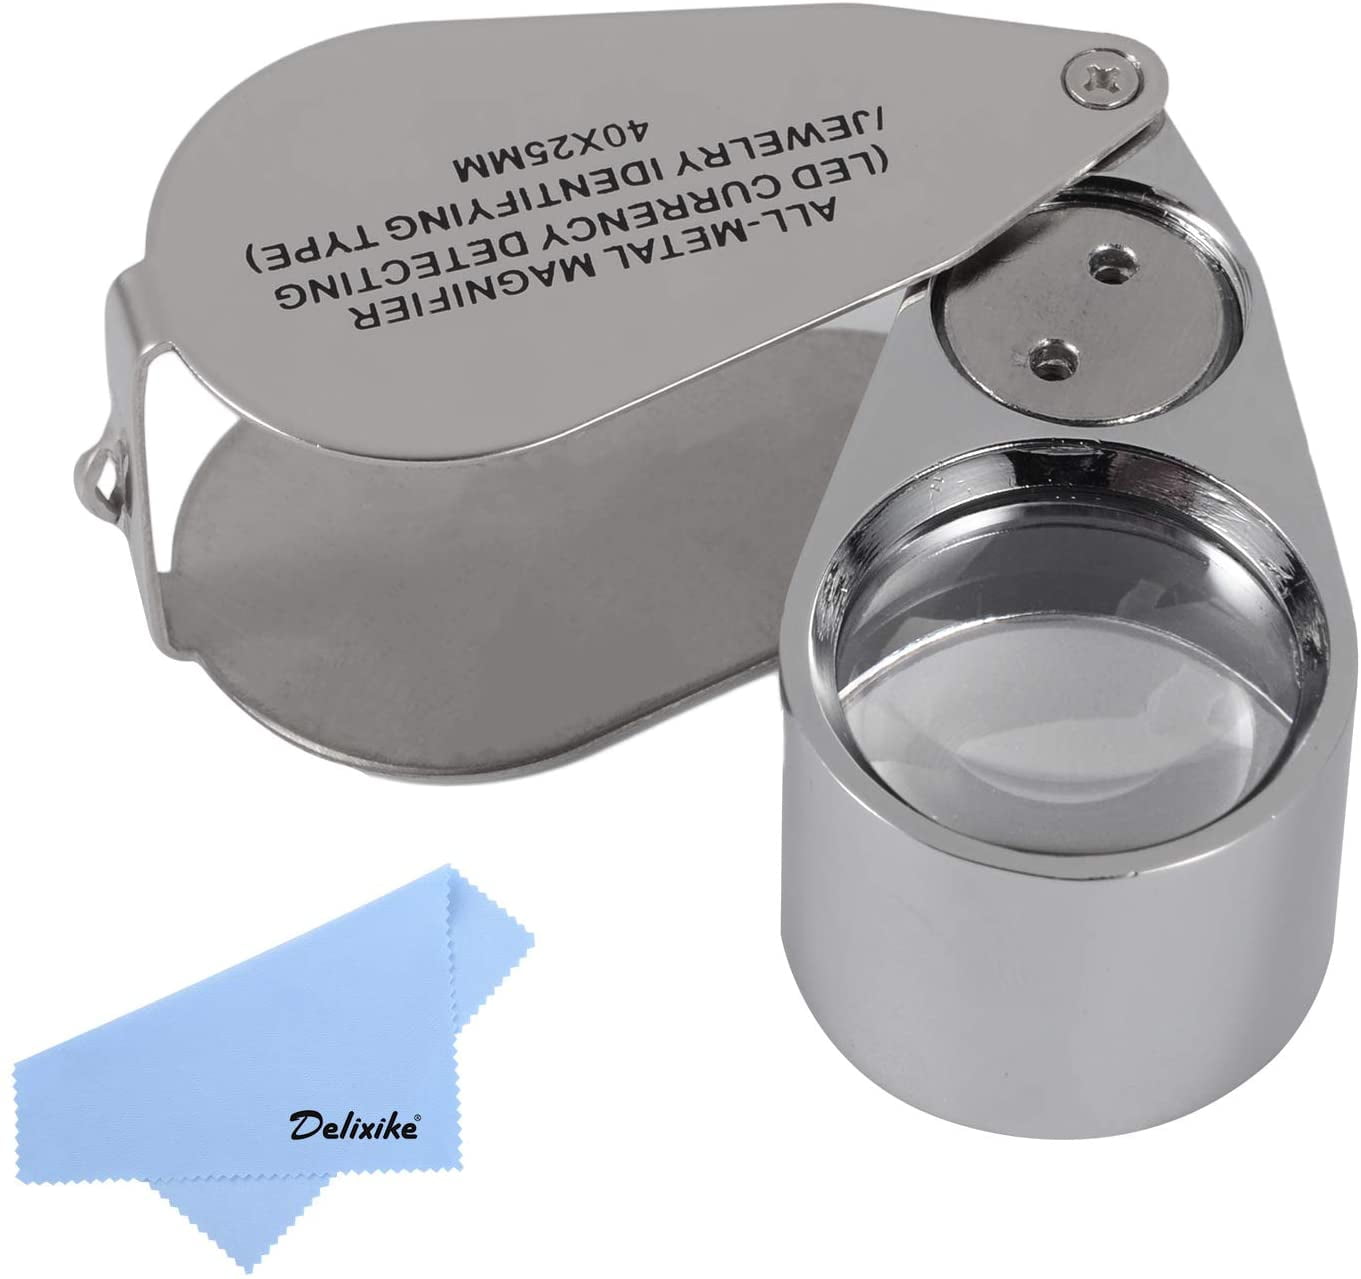 40x Illuminated Jeweler LED UV Lens Loupe Magnifier with Metal Construction and Optical Glass, with Kare and Kind Retail Package (40x x 25 mm, Silver)